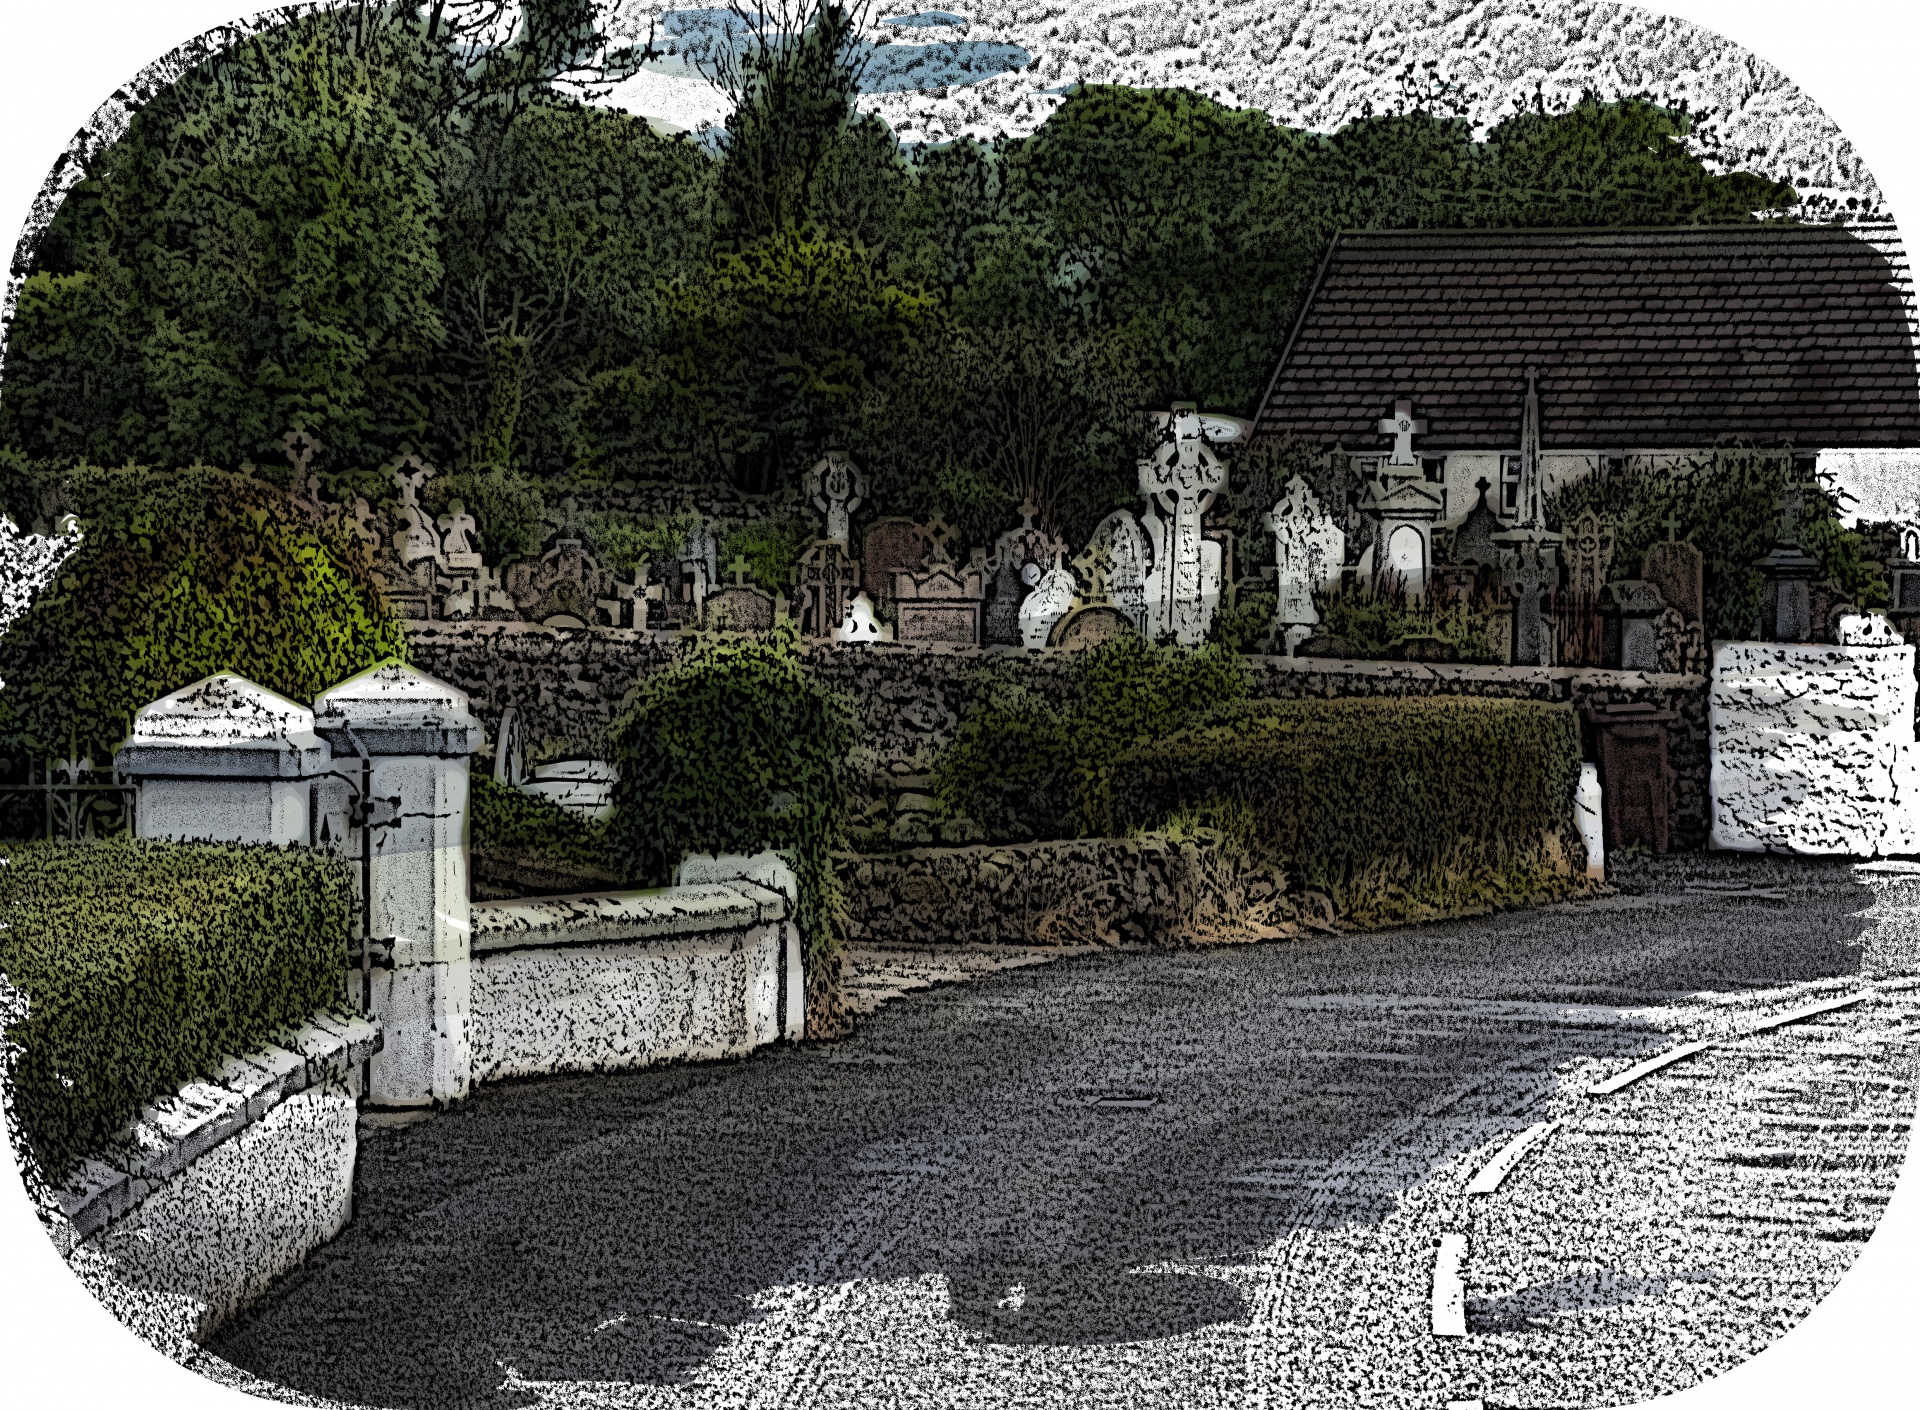 artistic rendering of an old cemetery in Ireland, outside of Belfast